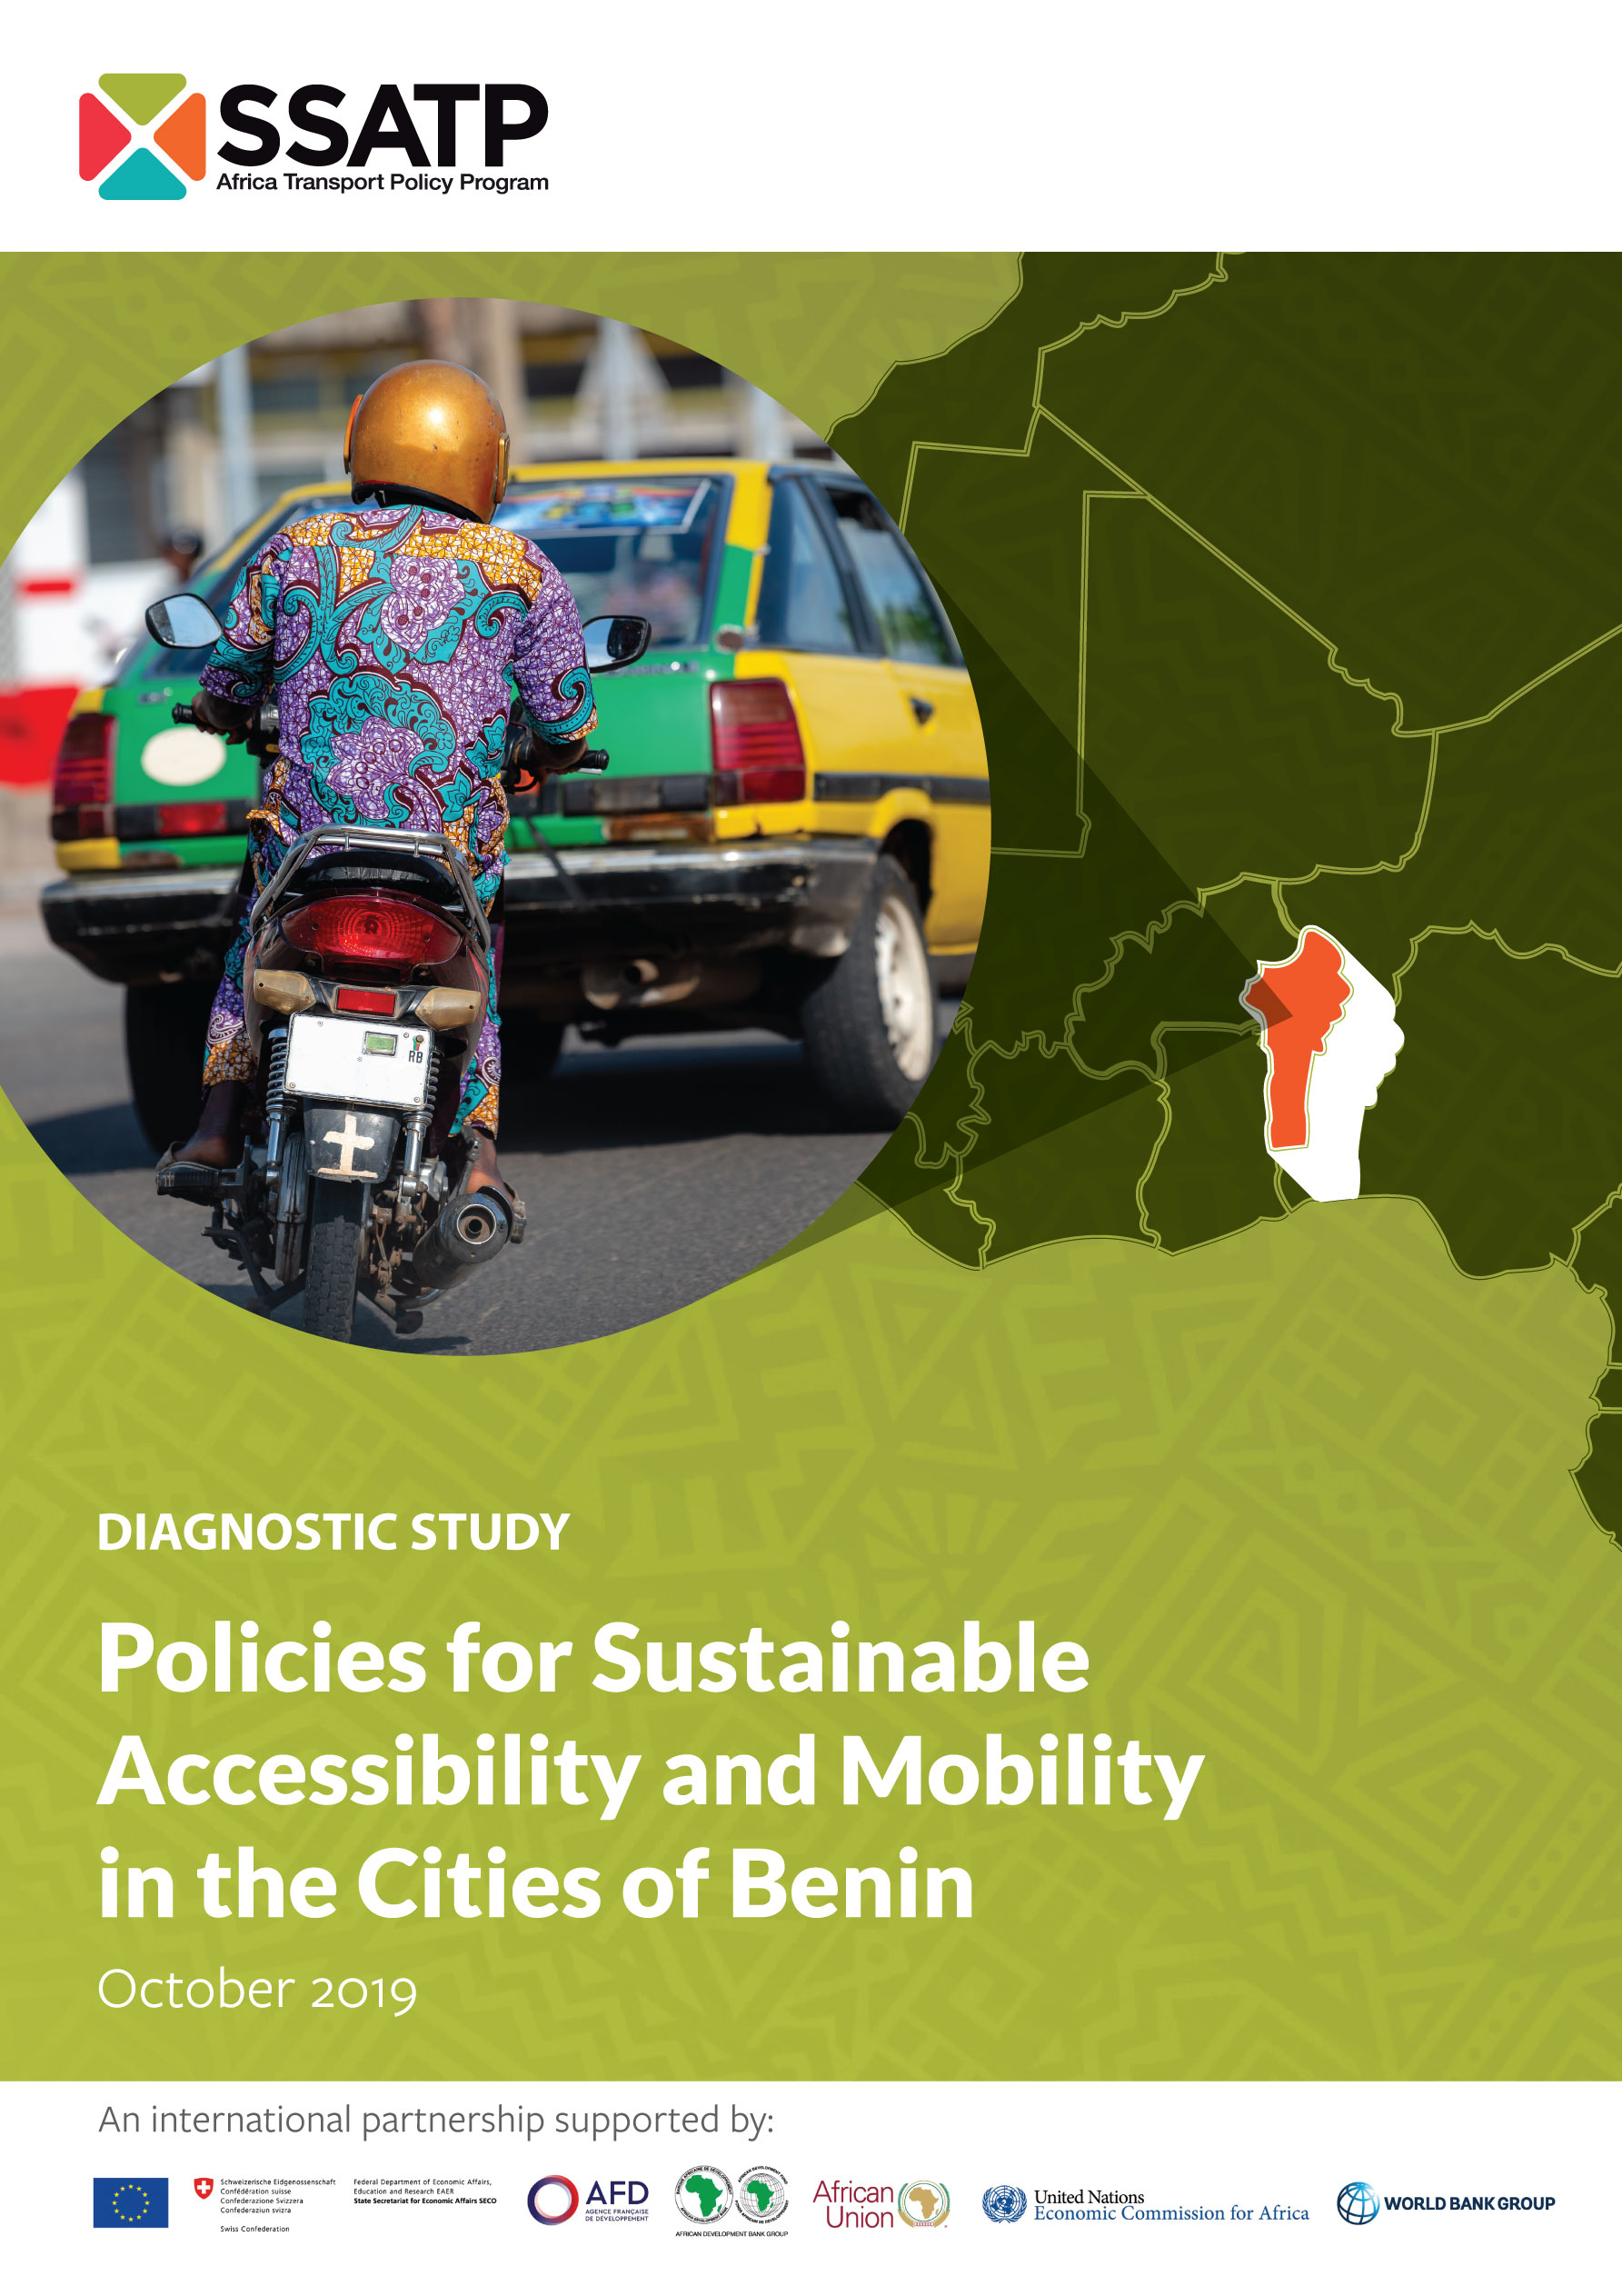 Policies for sustainable mobility and accessibility in cities of Benin - Diagnostic Study